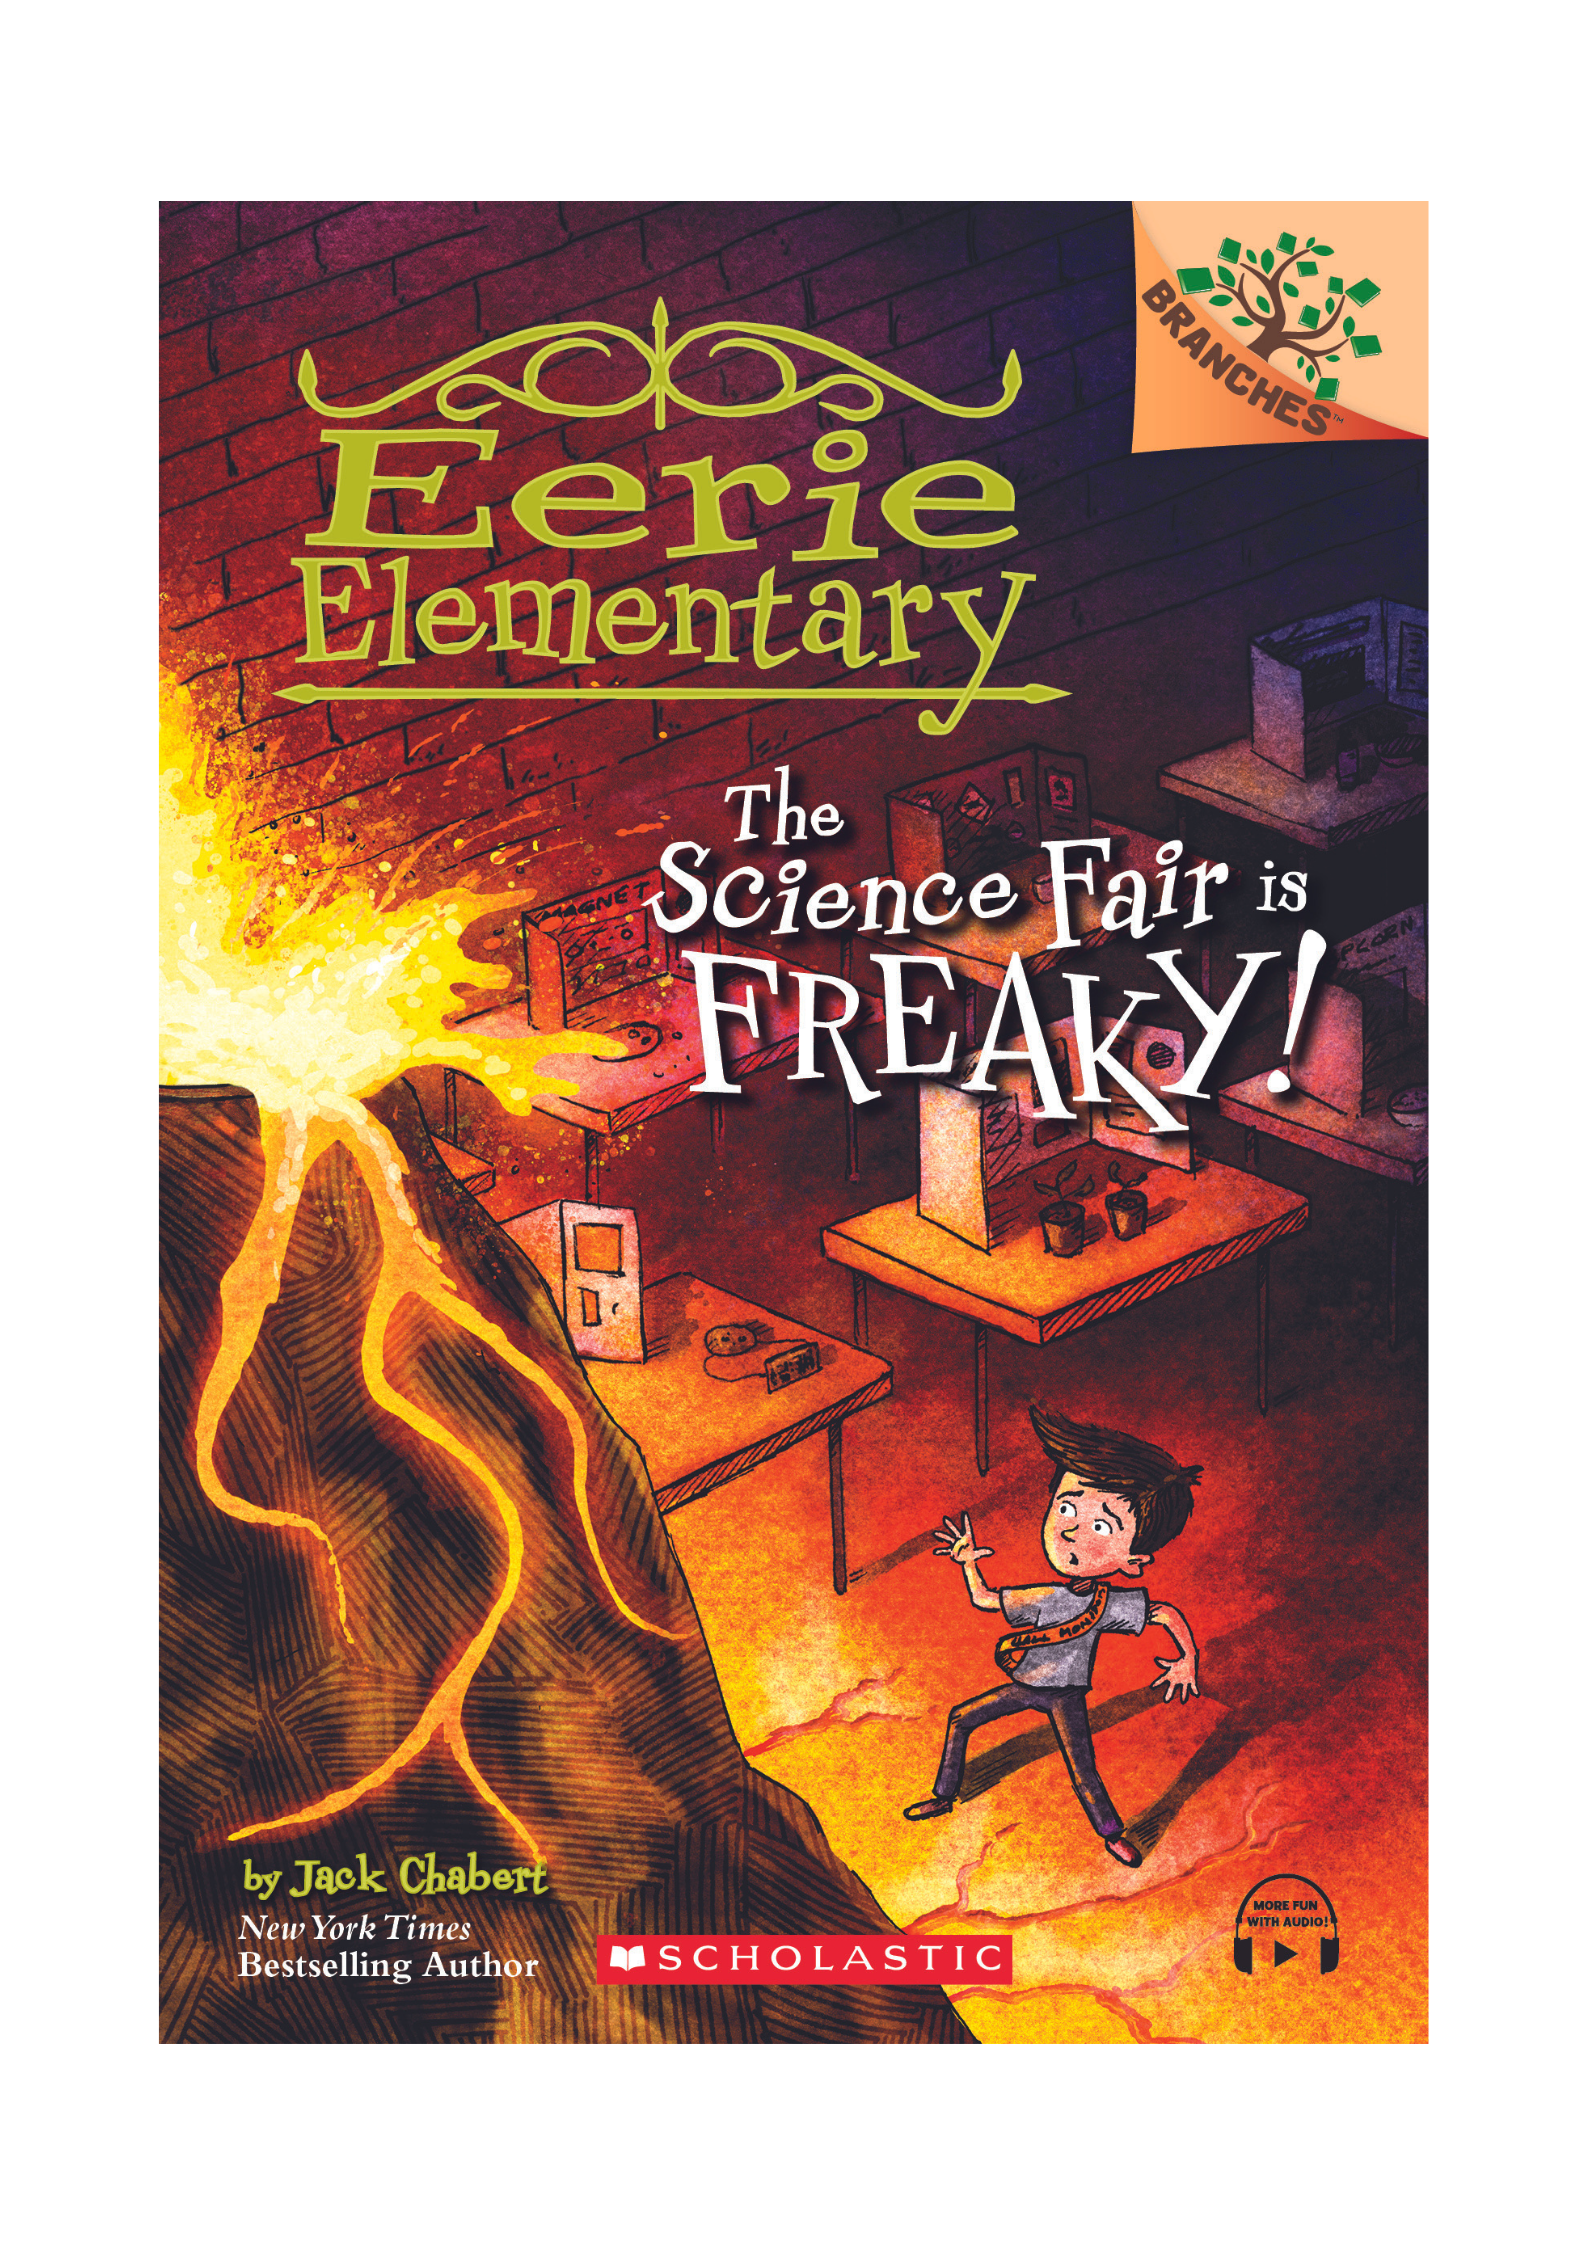 Branches – Eerie Elementary #4: The Science Fair is Freaky!